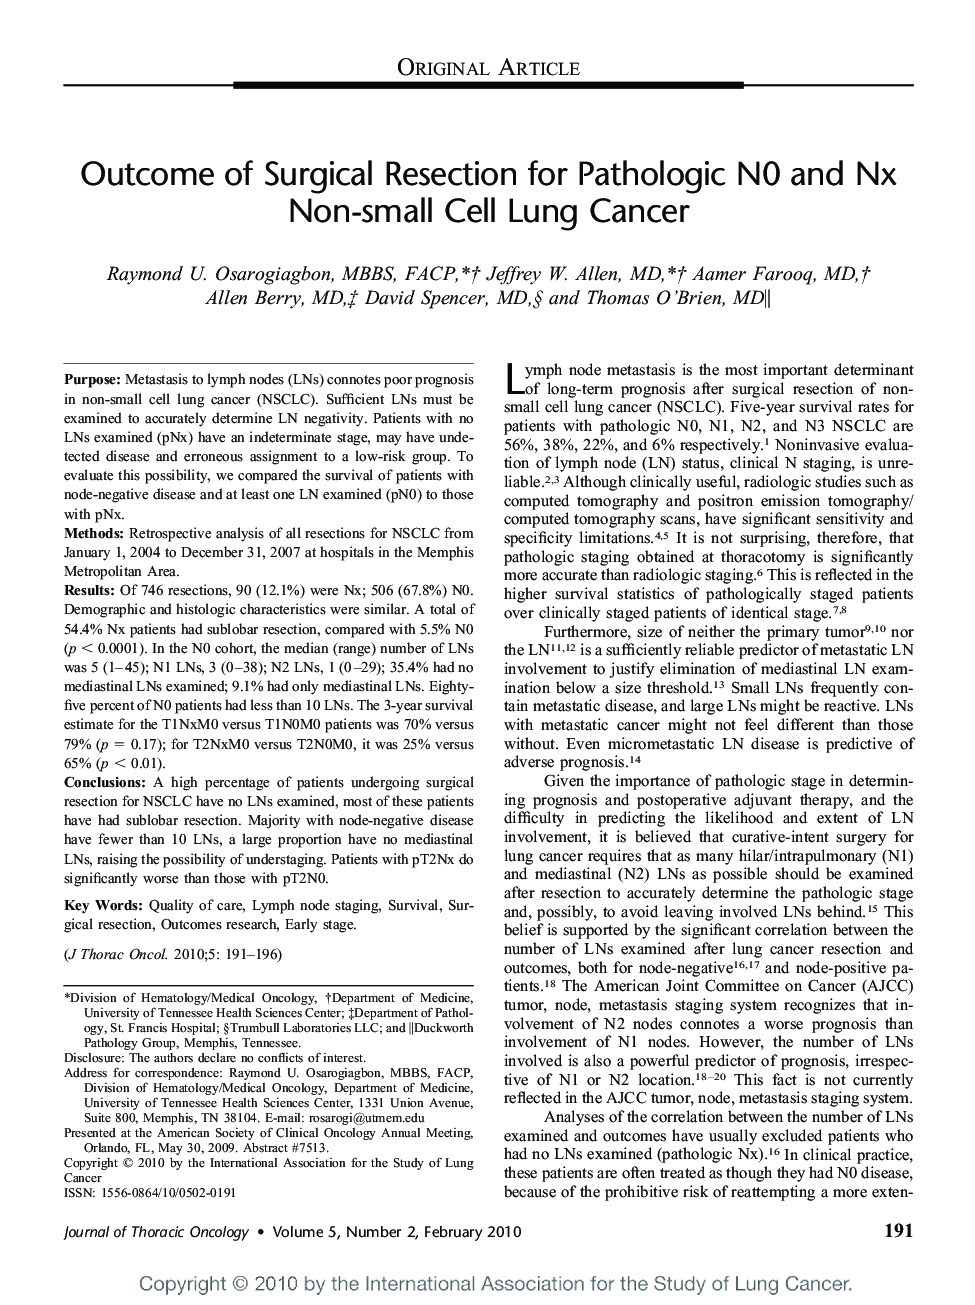 Outcome of Surgical Resection for Pathologic N0 and Nx Non-small Cell Lung Cancer 